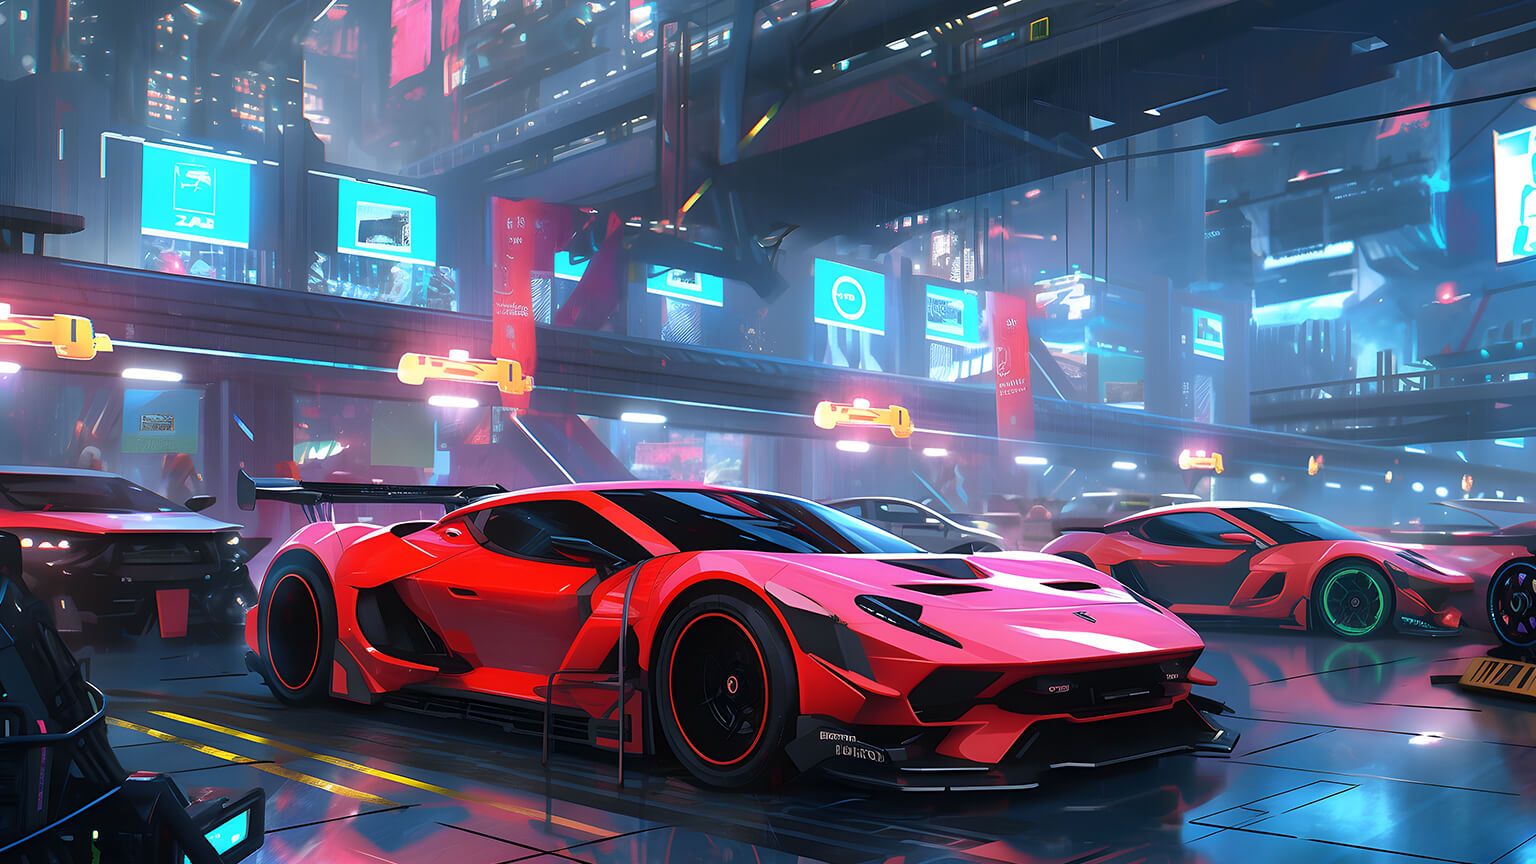 A red Lamborghini is parked in a garage with neon lights - Cyberpunk